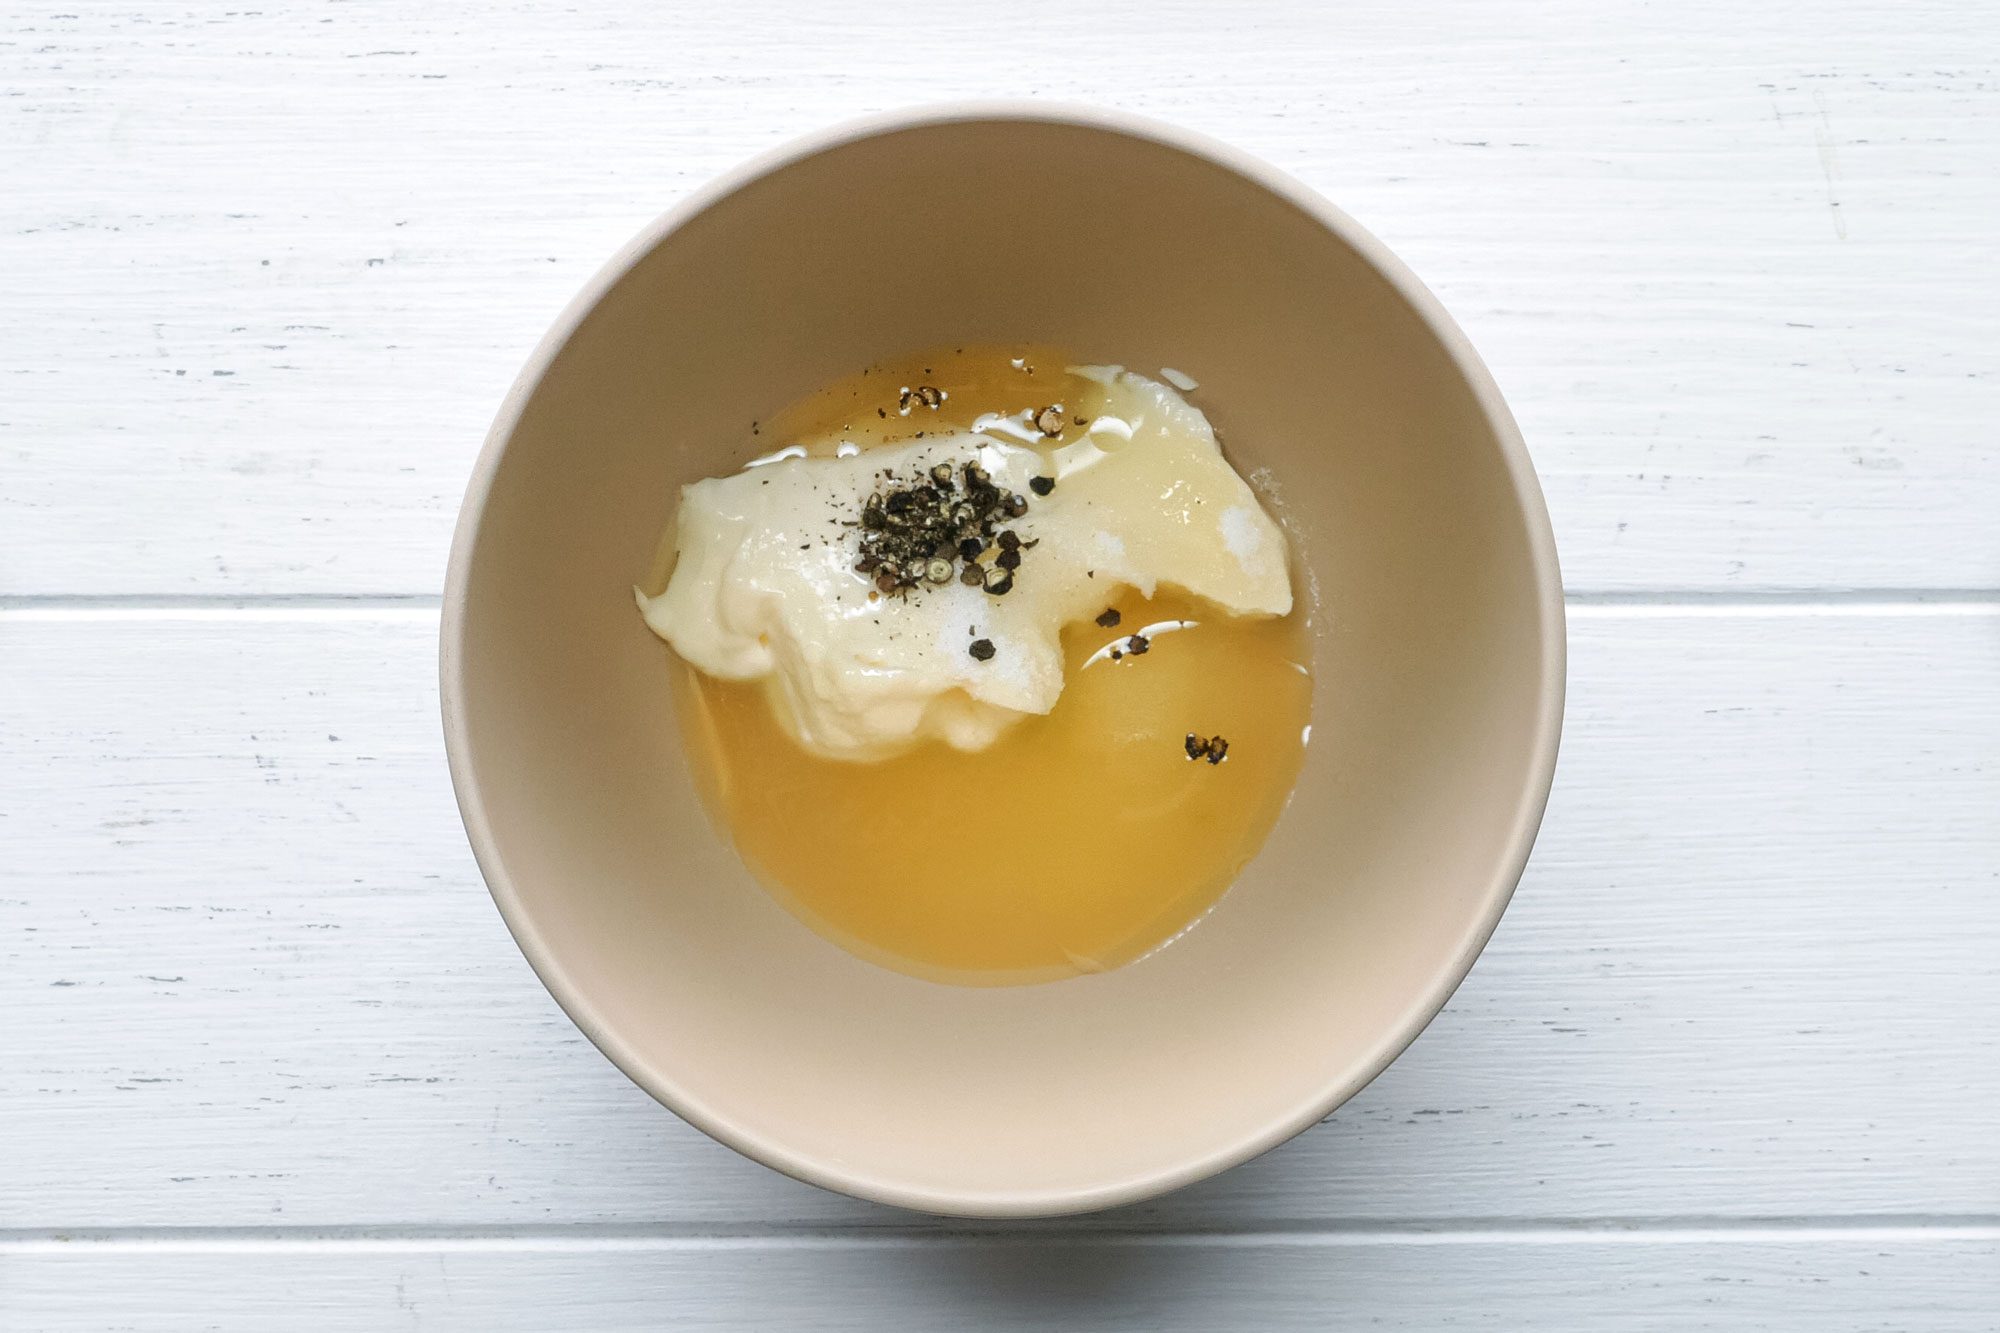 mayo, lemon juice, sugar, olive oil, salt and pepper in a small bowl on painted wooden surface